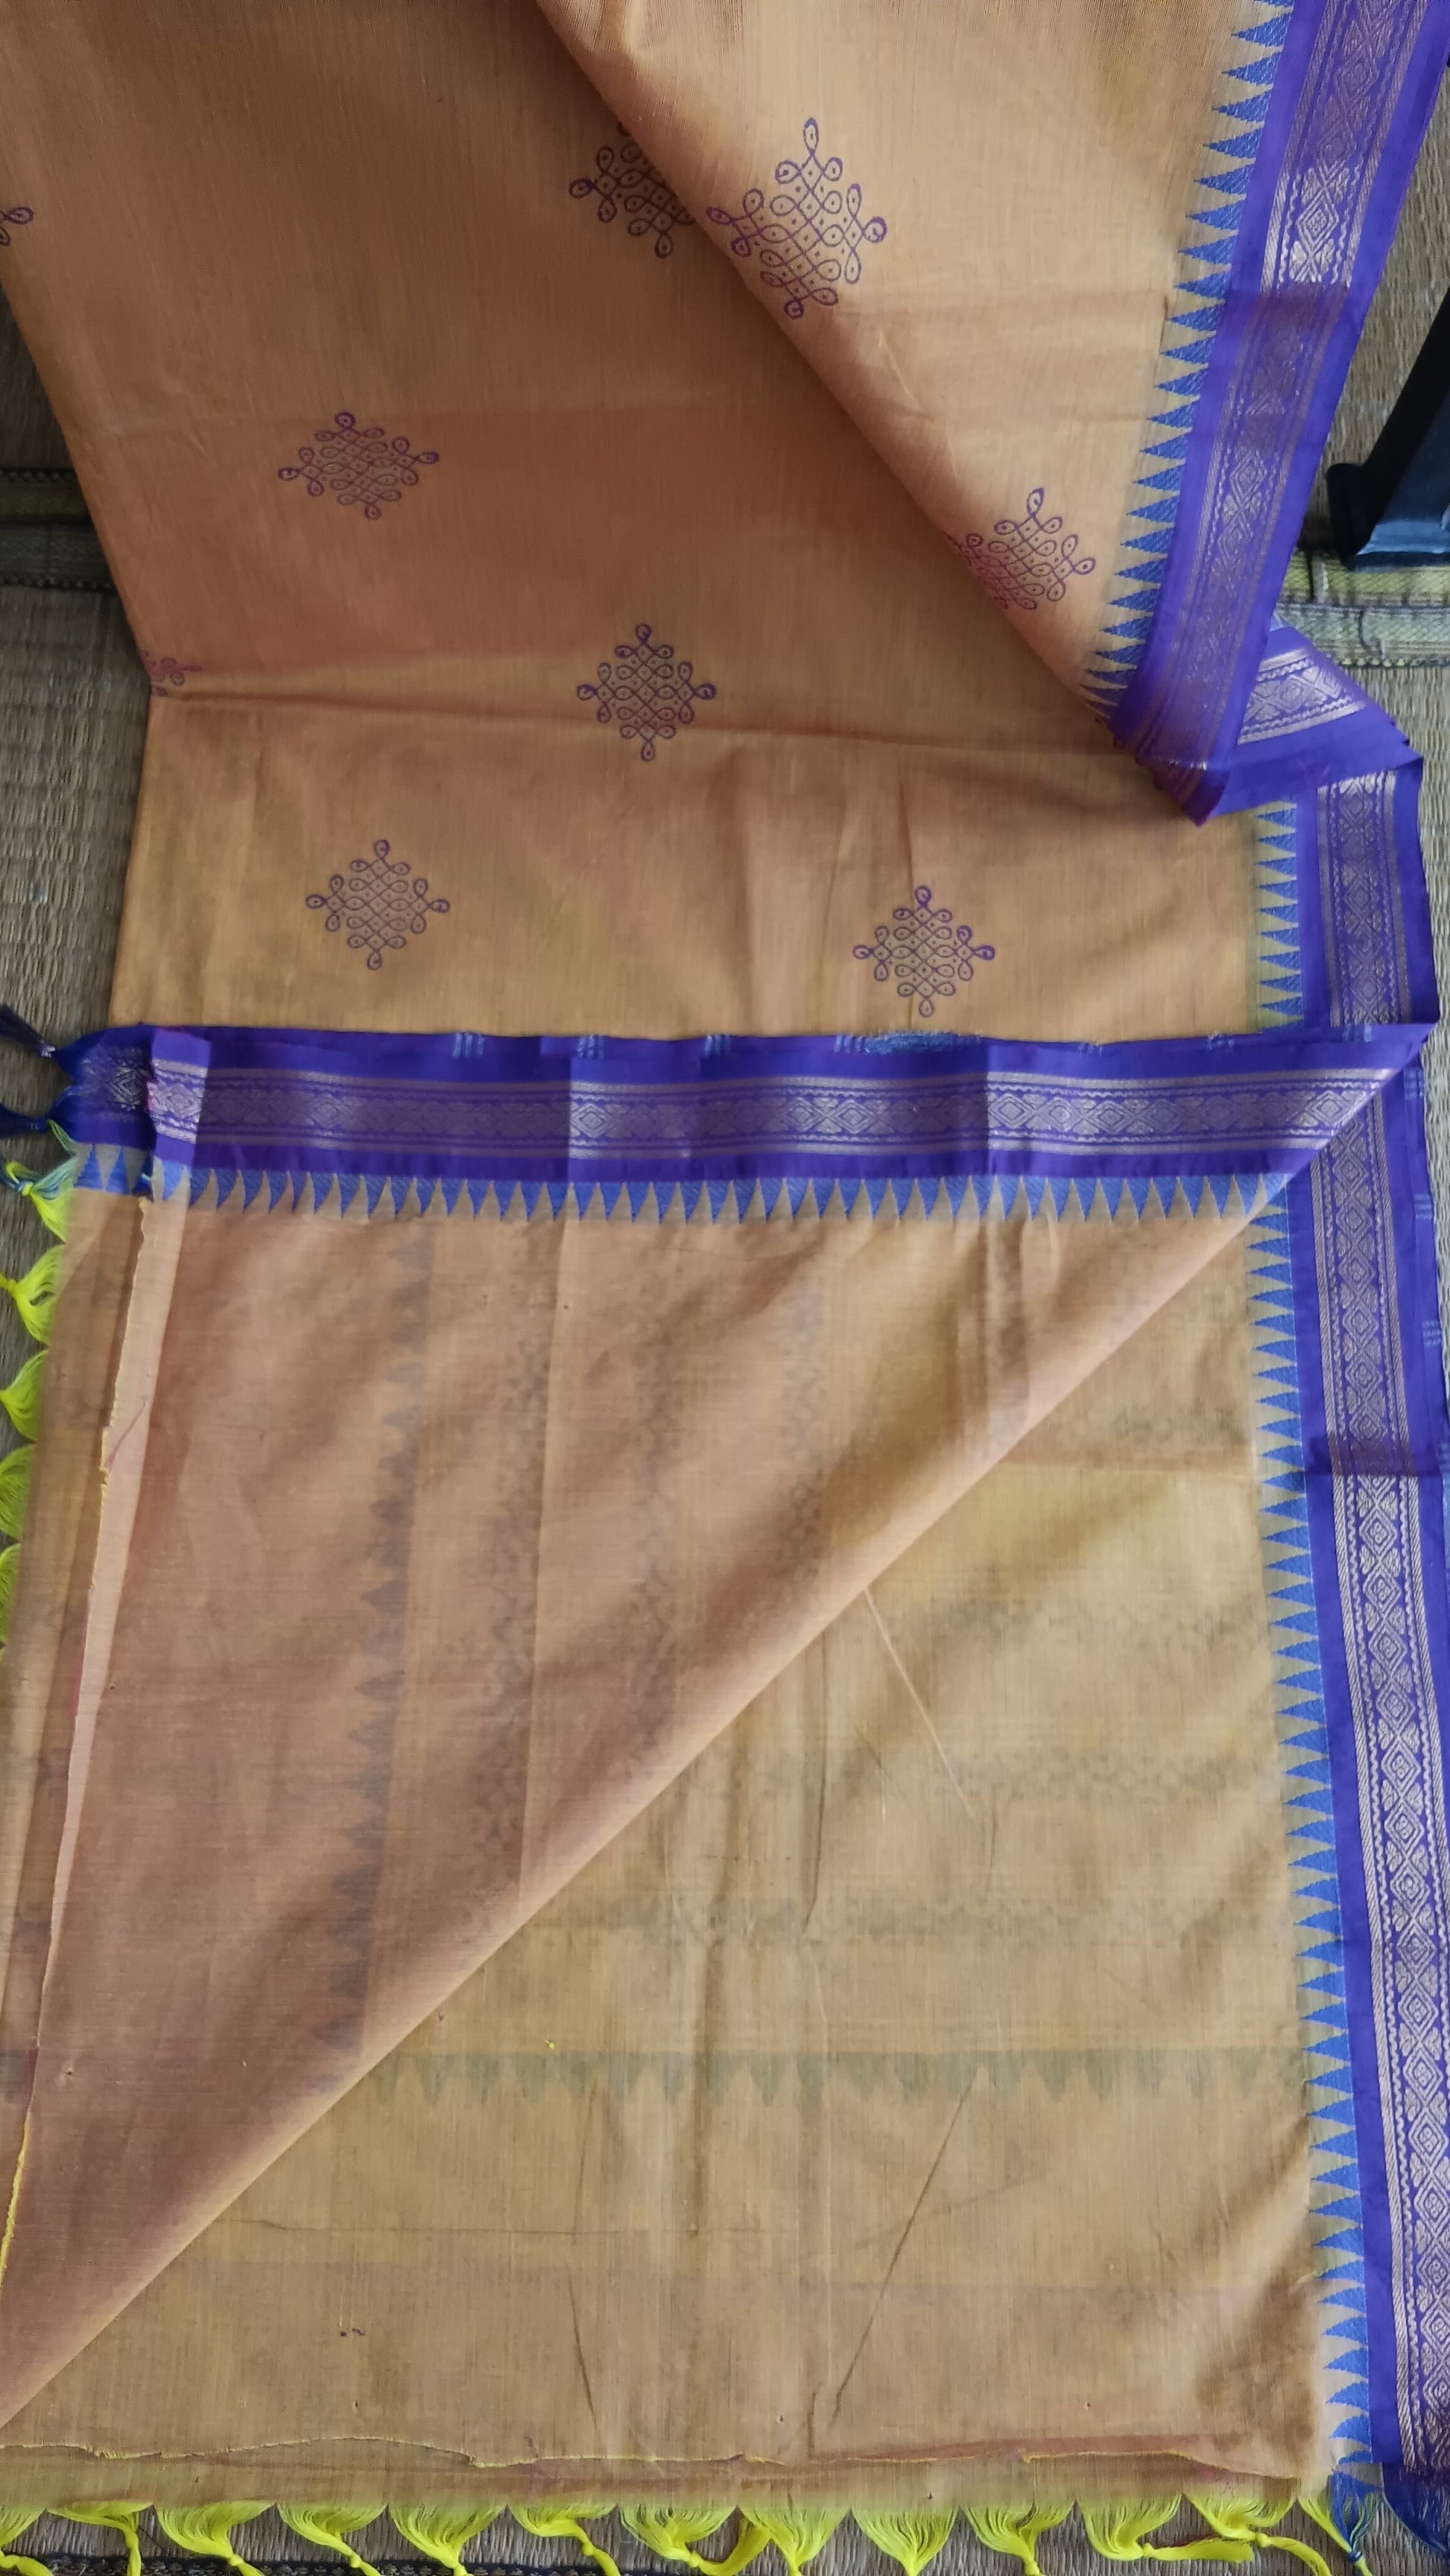 View from the top of the plain blouse of a south cotton function wear saree